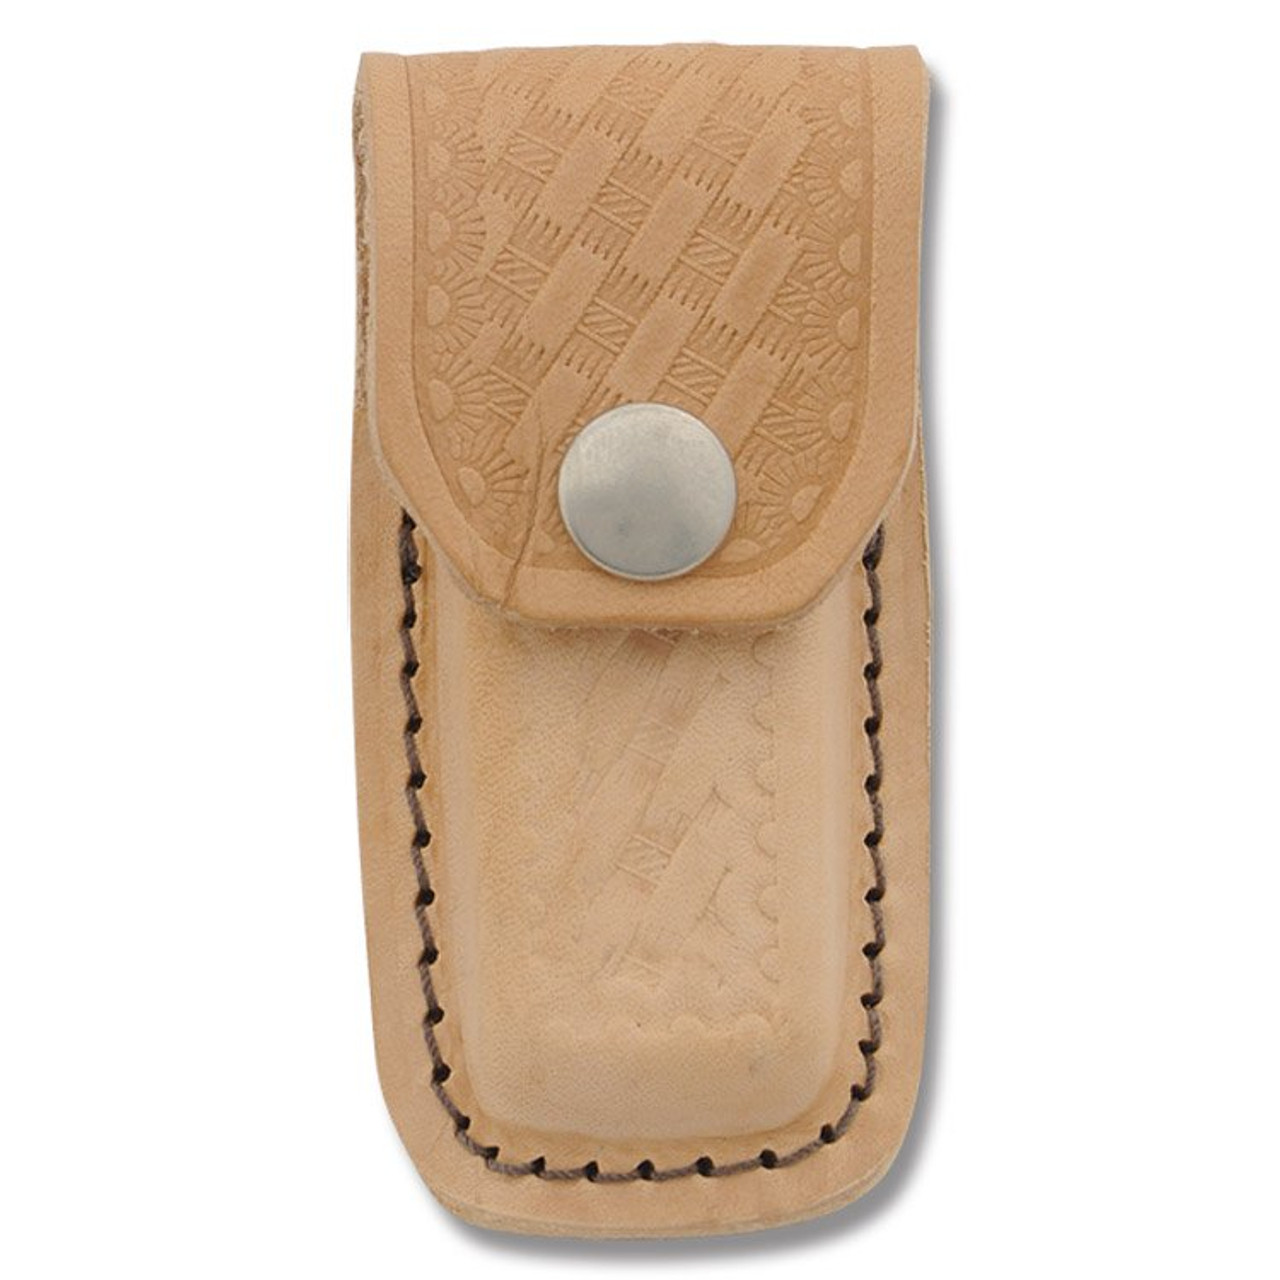 Fixed Blade Leather Sheath for 10 Blade - Smoky Mountain Knife Works